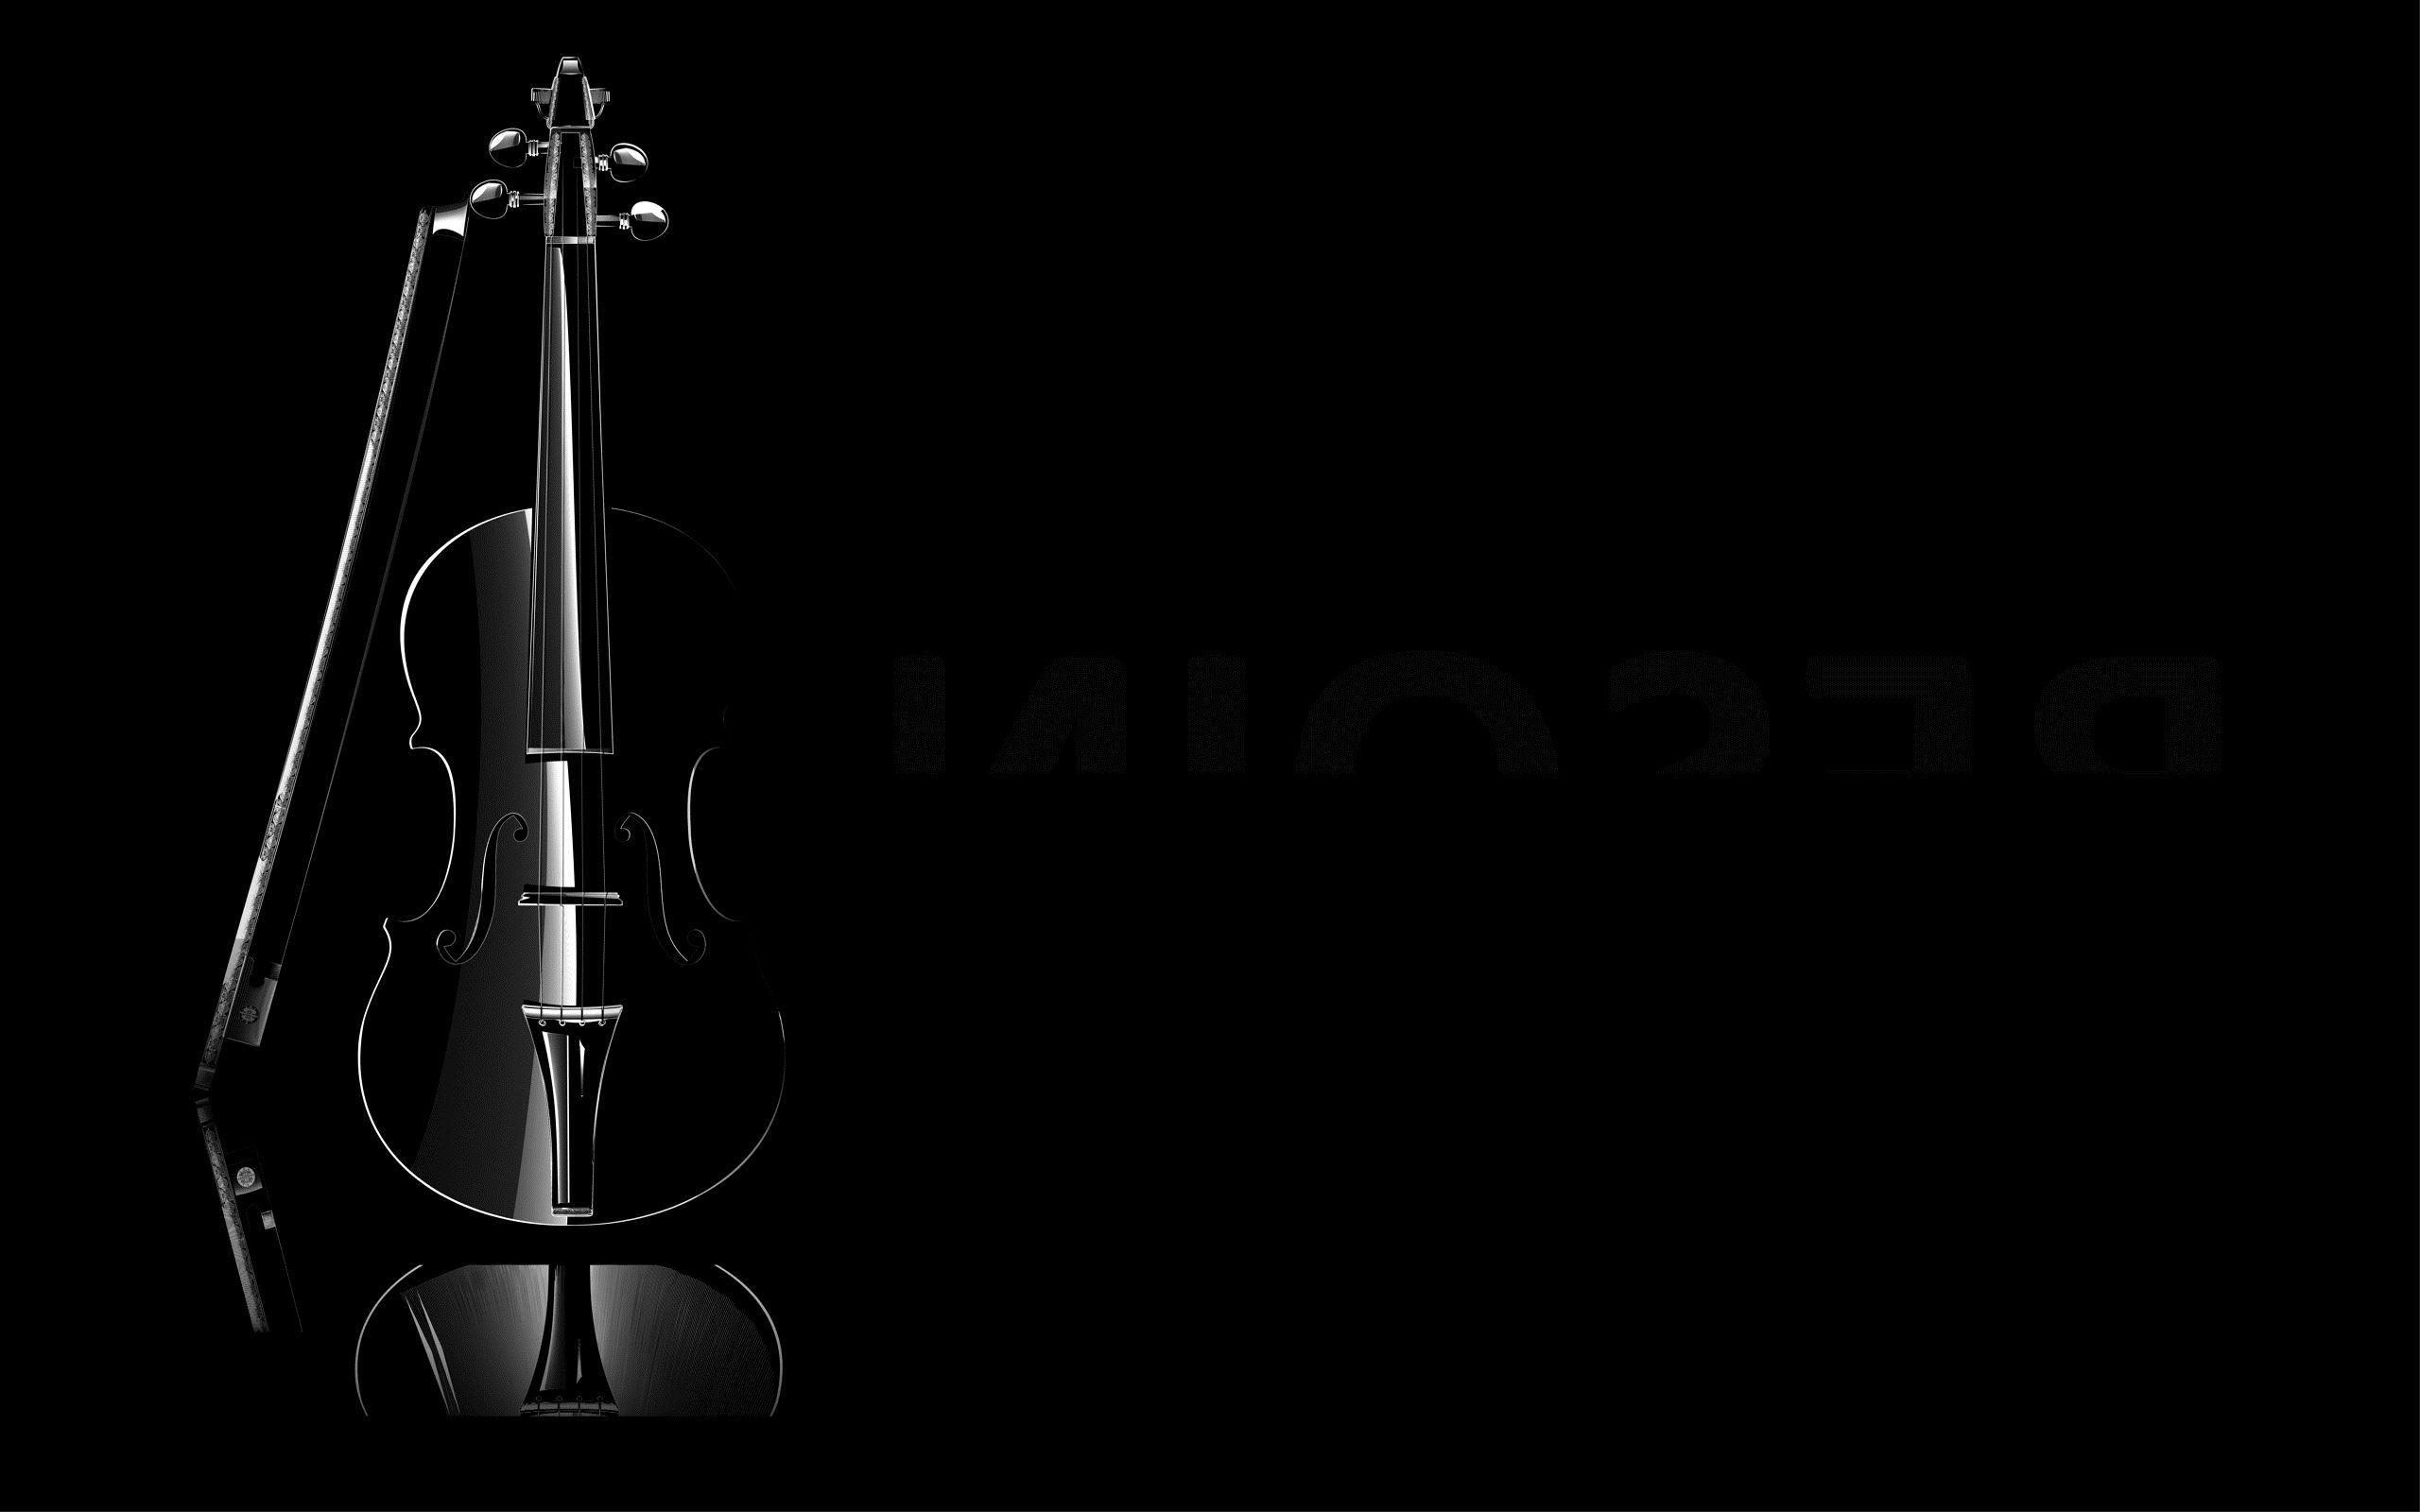 200 Violin Close Up Black And White Photos and Premium High Res Pictures   Getty Images